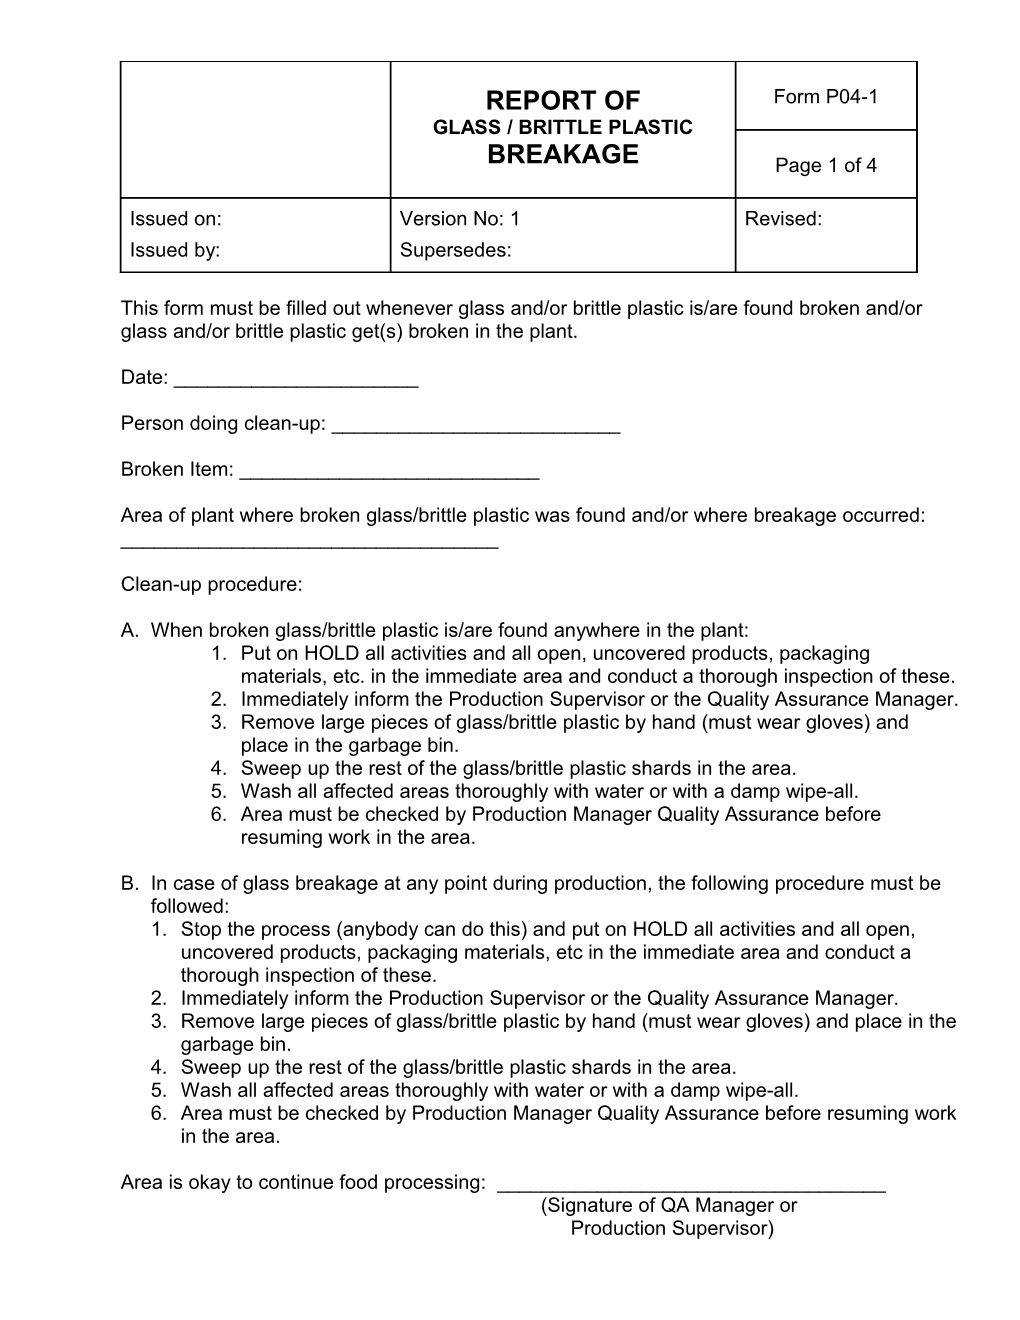 This Form Must Be Filled out Whenever Glass And/Or Brittle Plastic Is/Are Found Broken